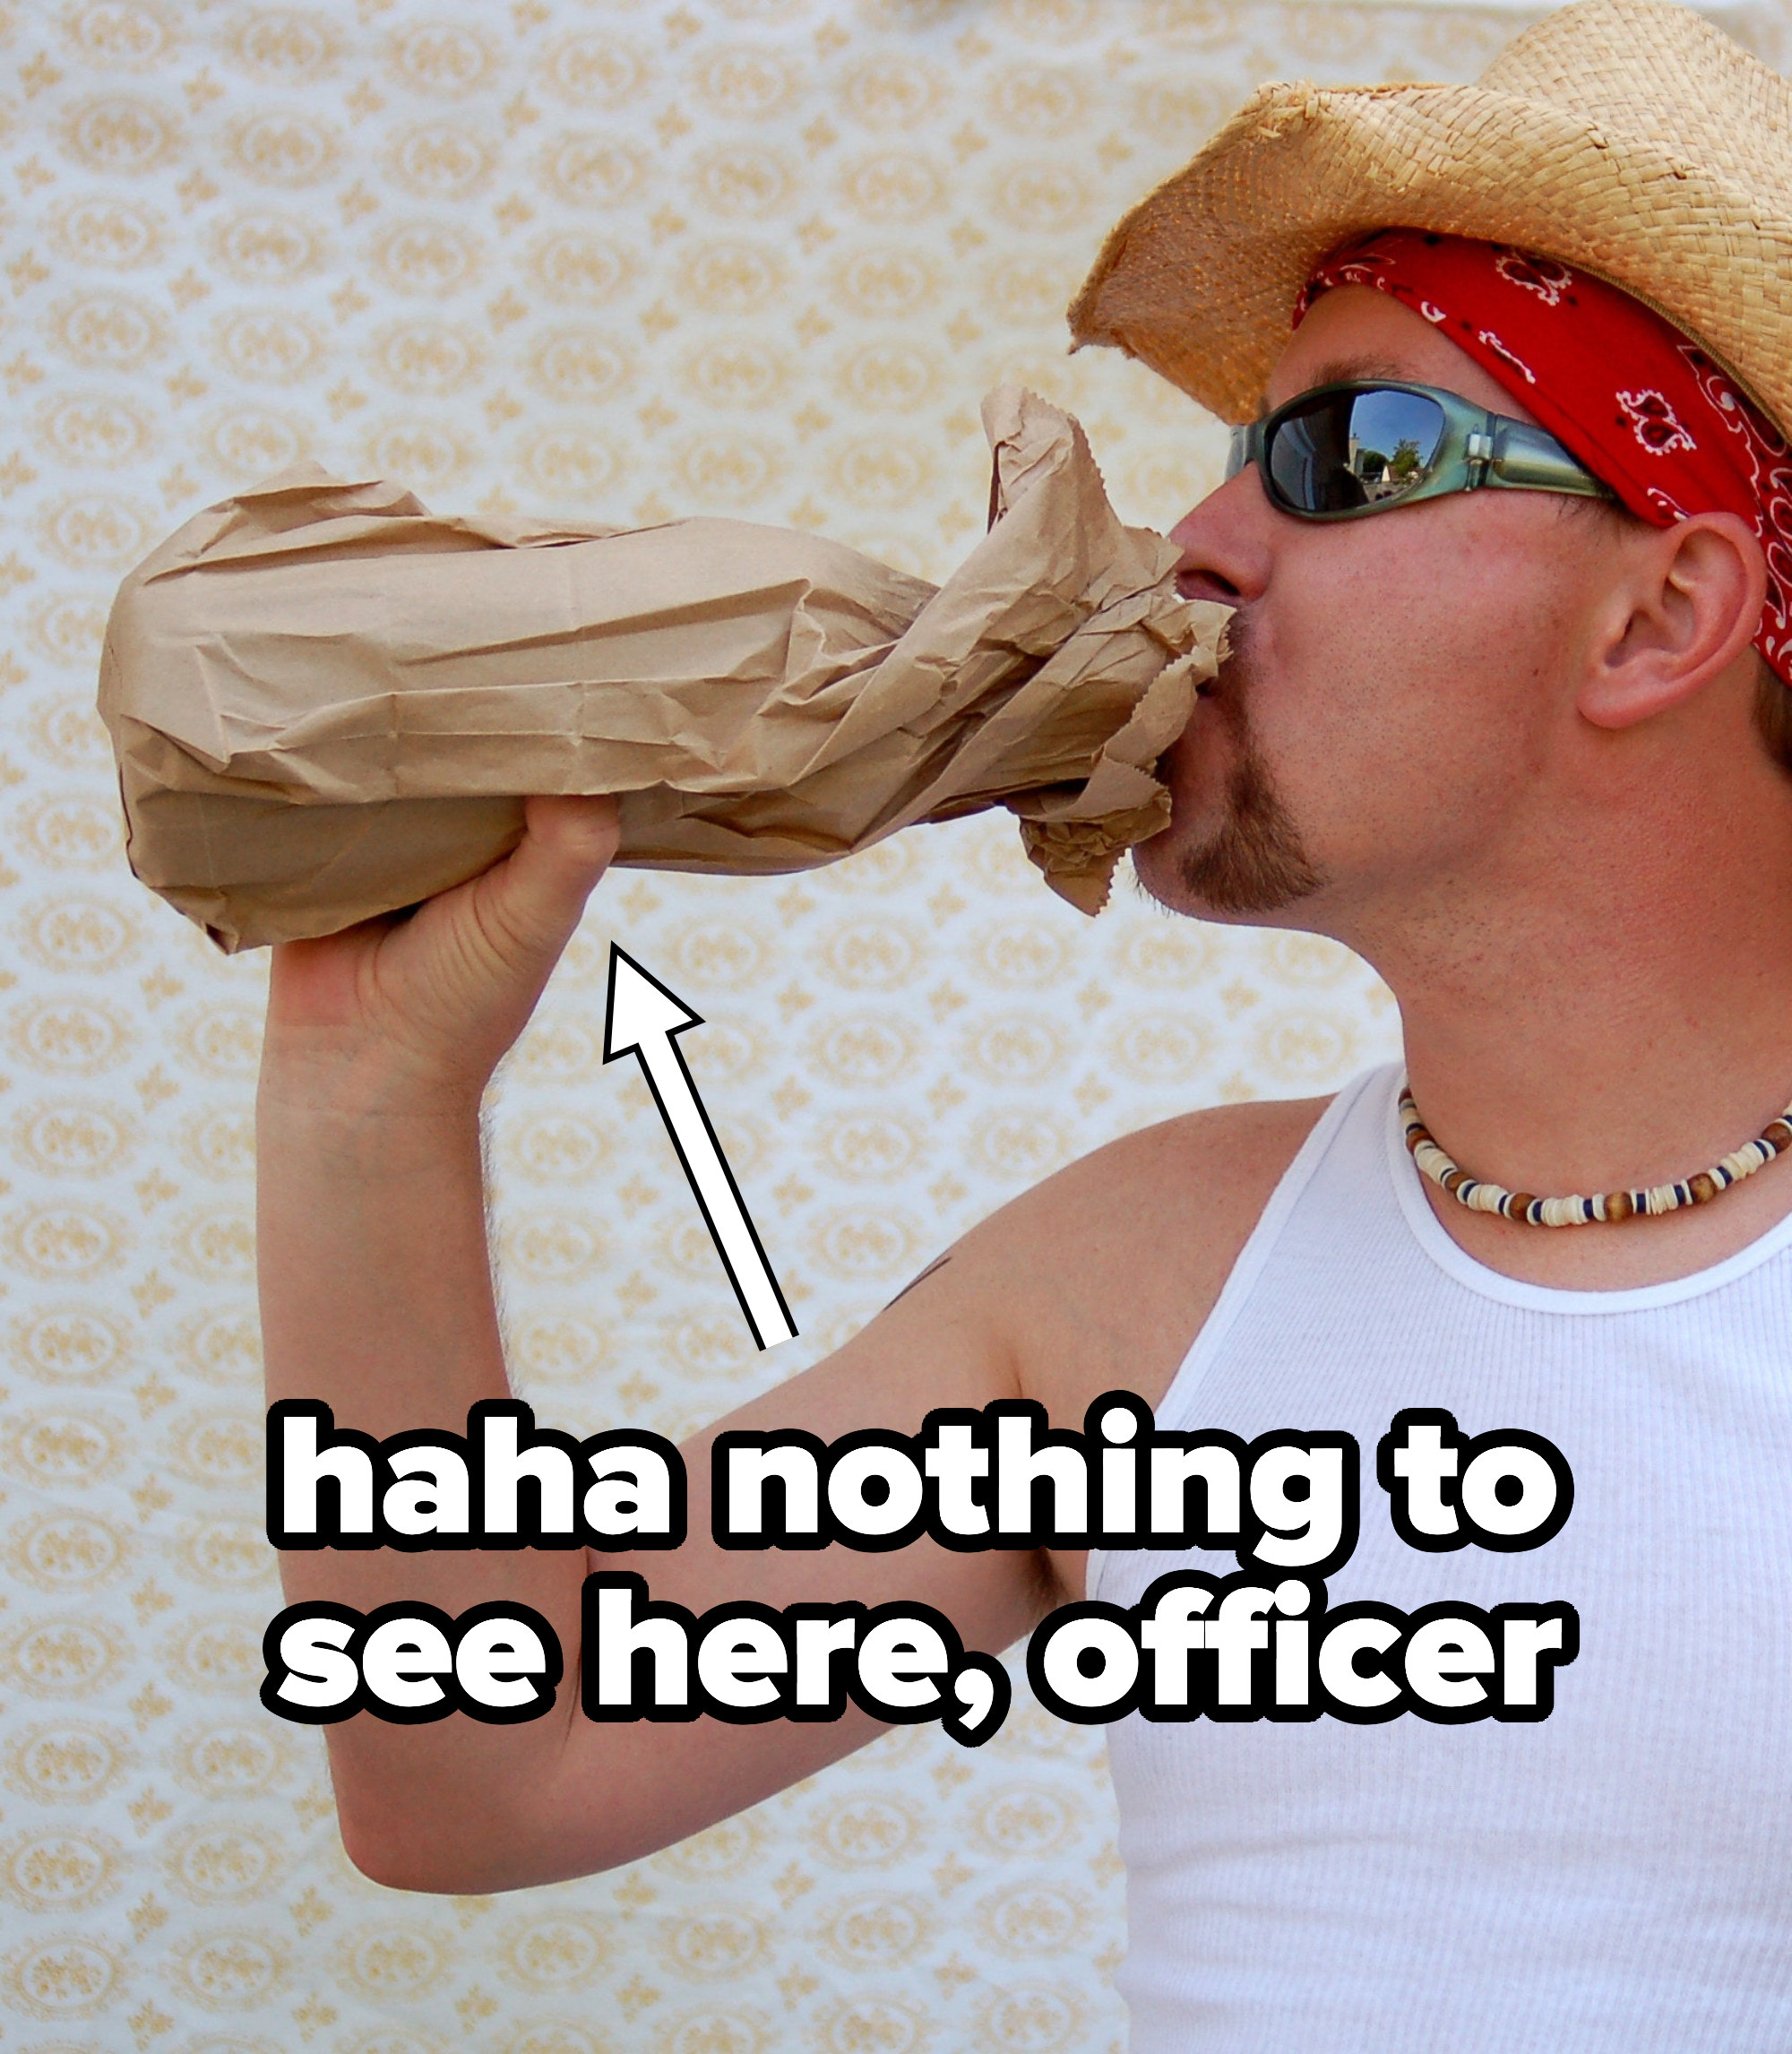 Someone drinking alcohol out of a paper bag